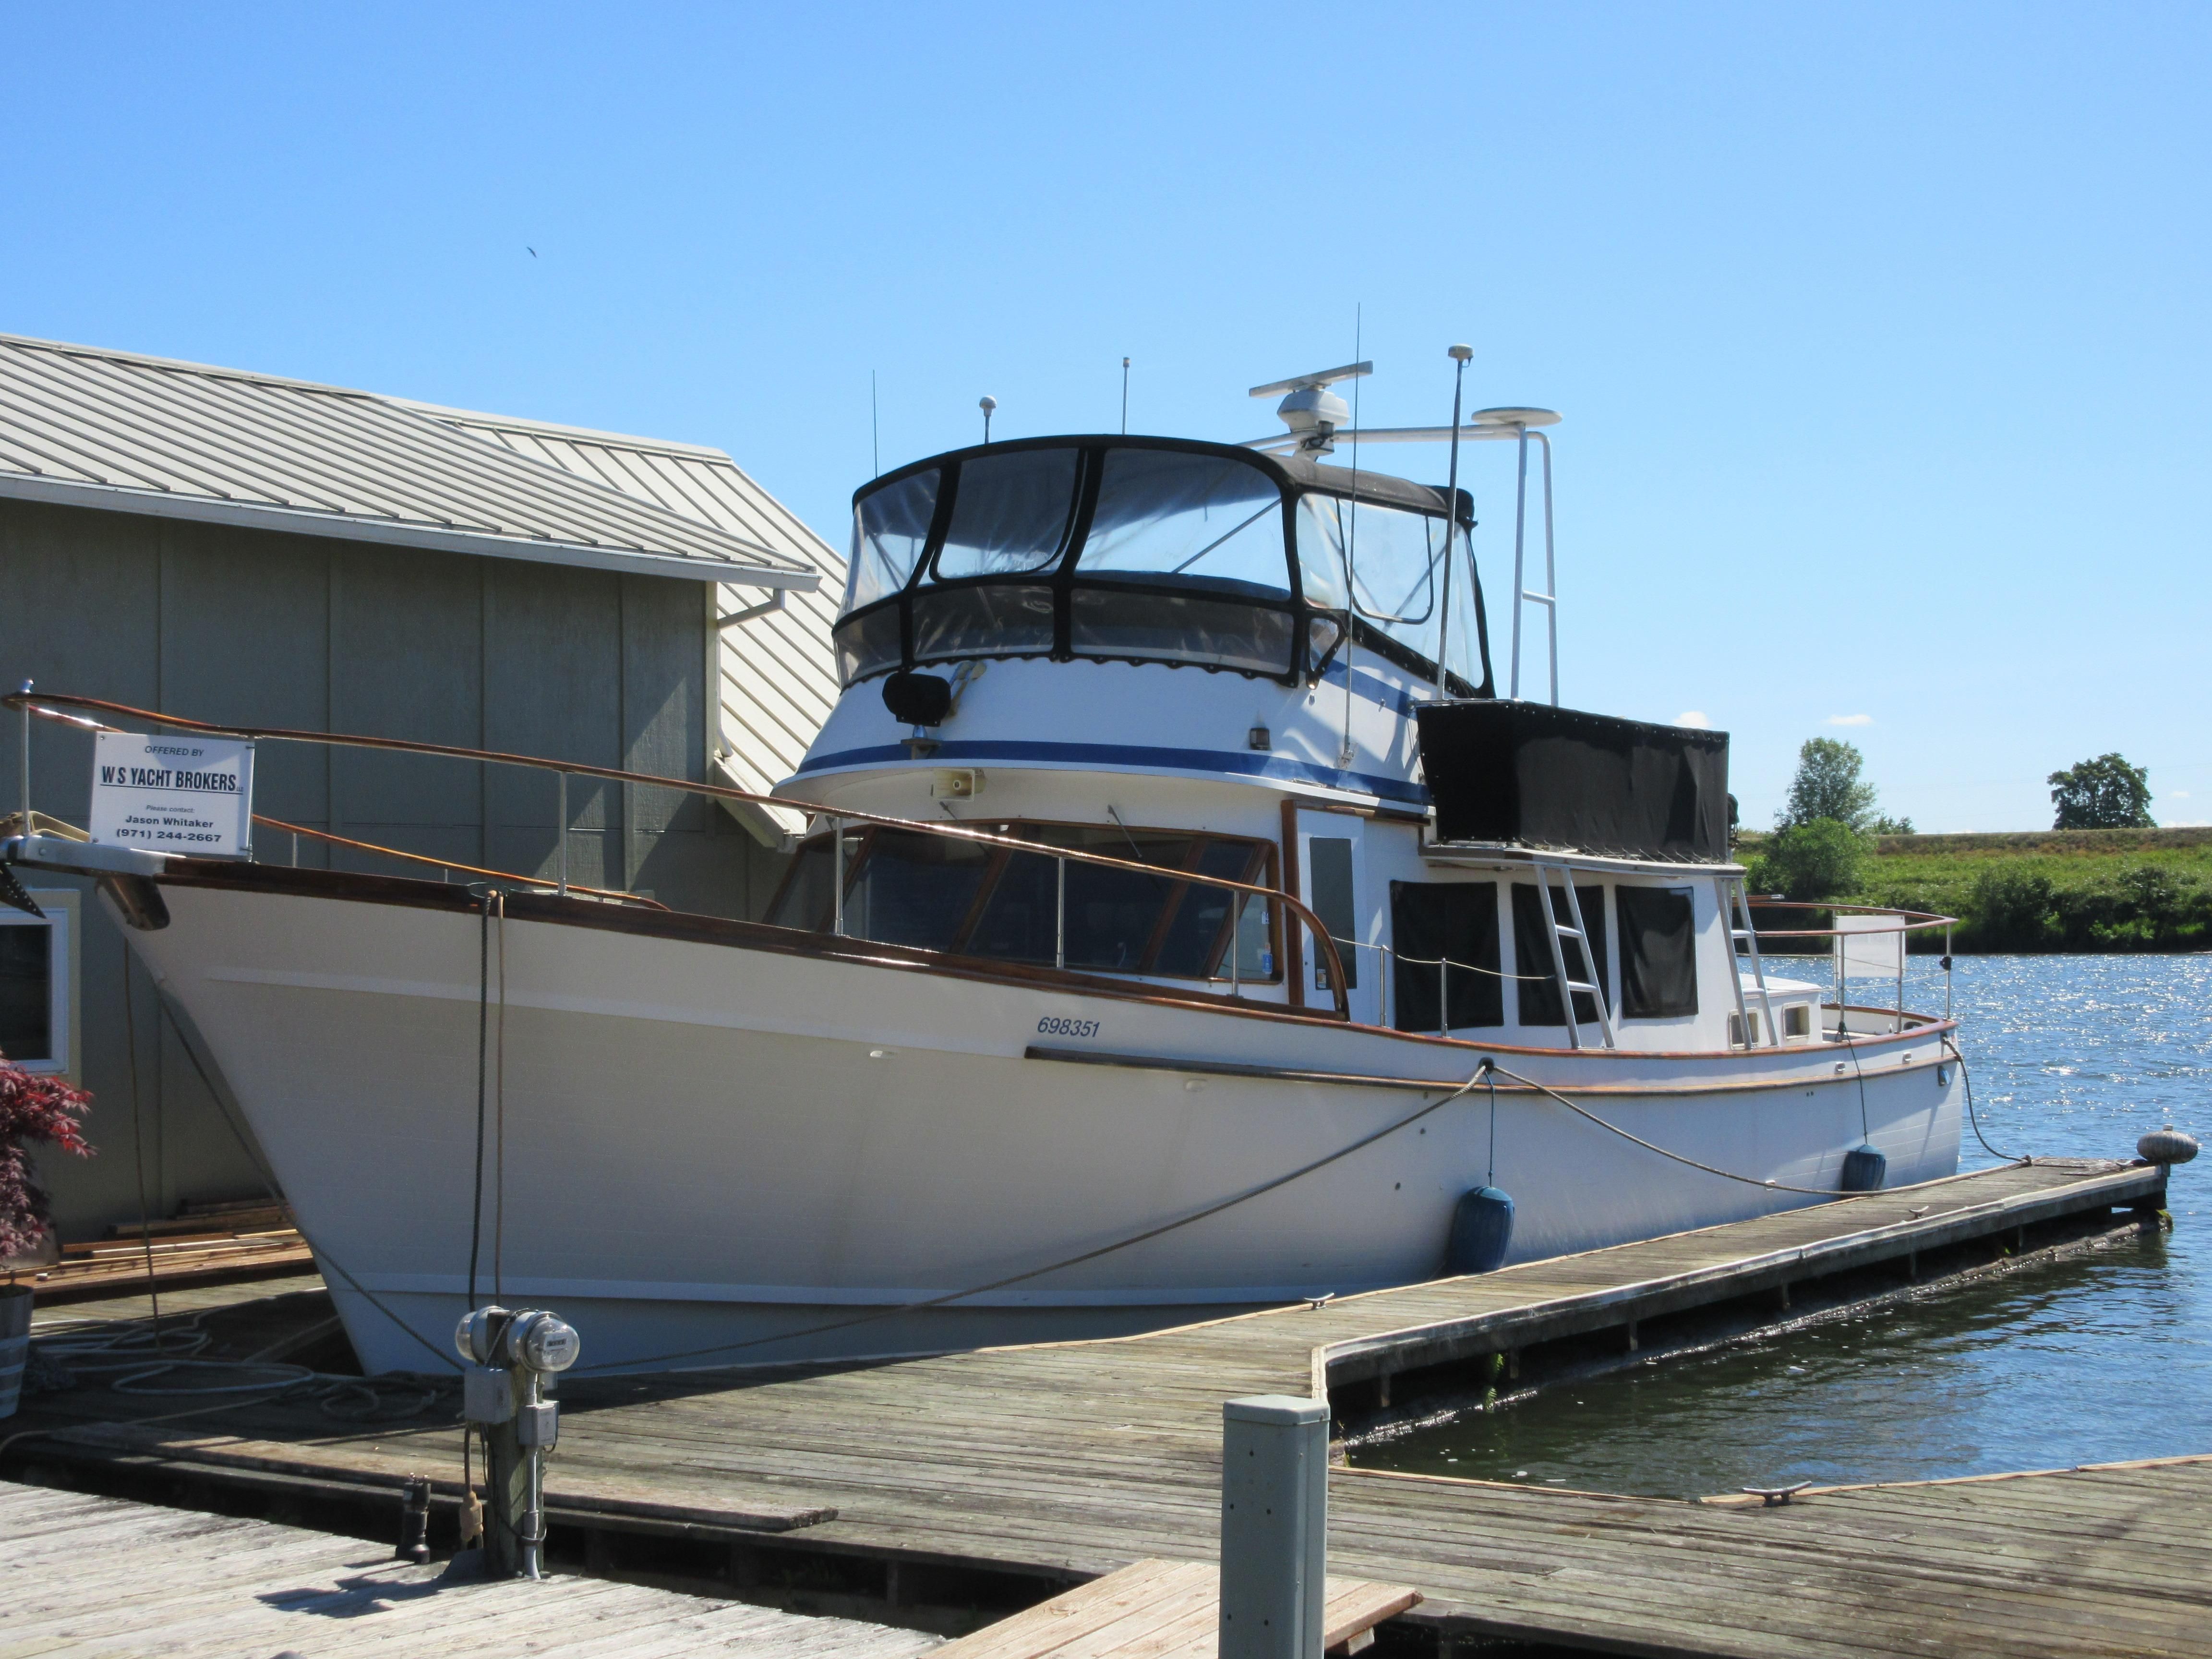 Where do you find a boat for sale by an owner?